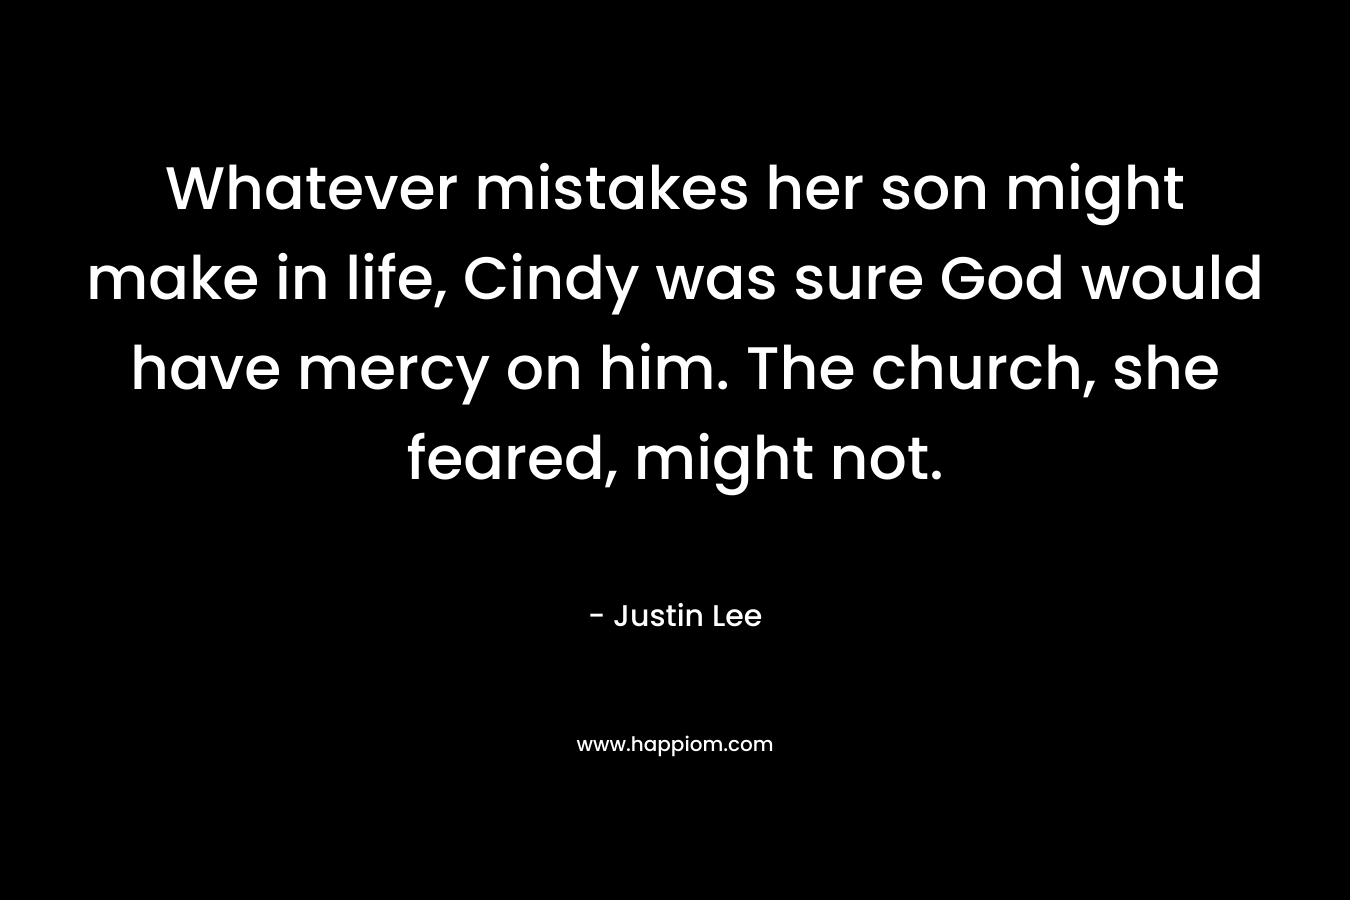 Whatever mistakes her son might make in life, Cindy was sure God would have mercy on him. The church, she feared, might not. – Justin Lee